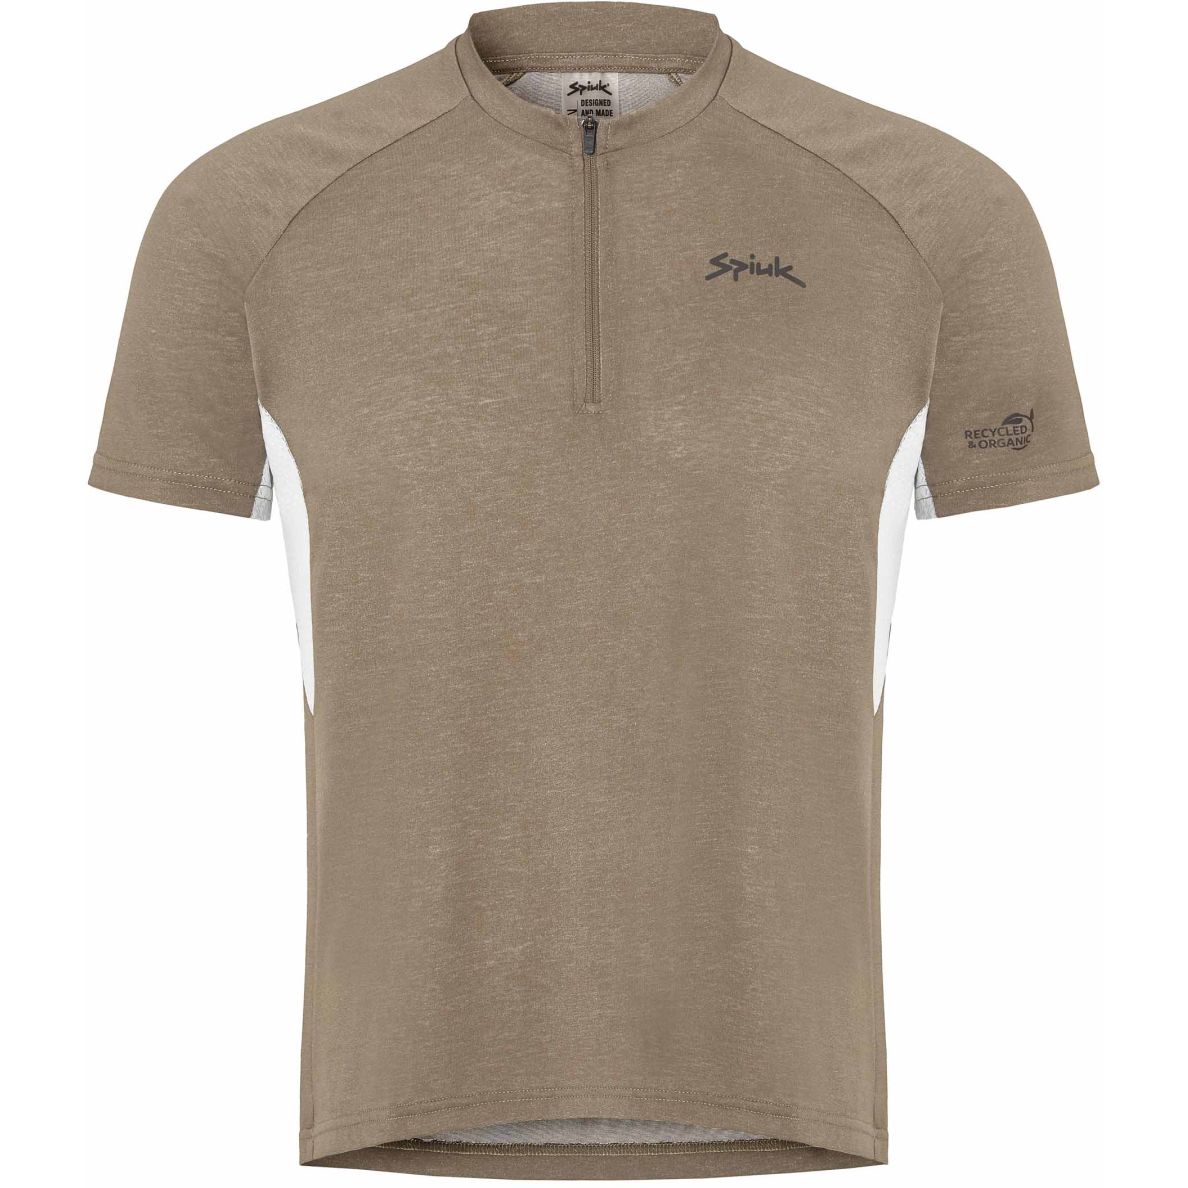 Picture of Spiuk ALL TERRAIN Jersey Men - brown